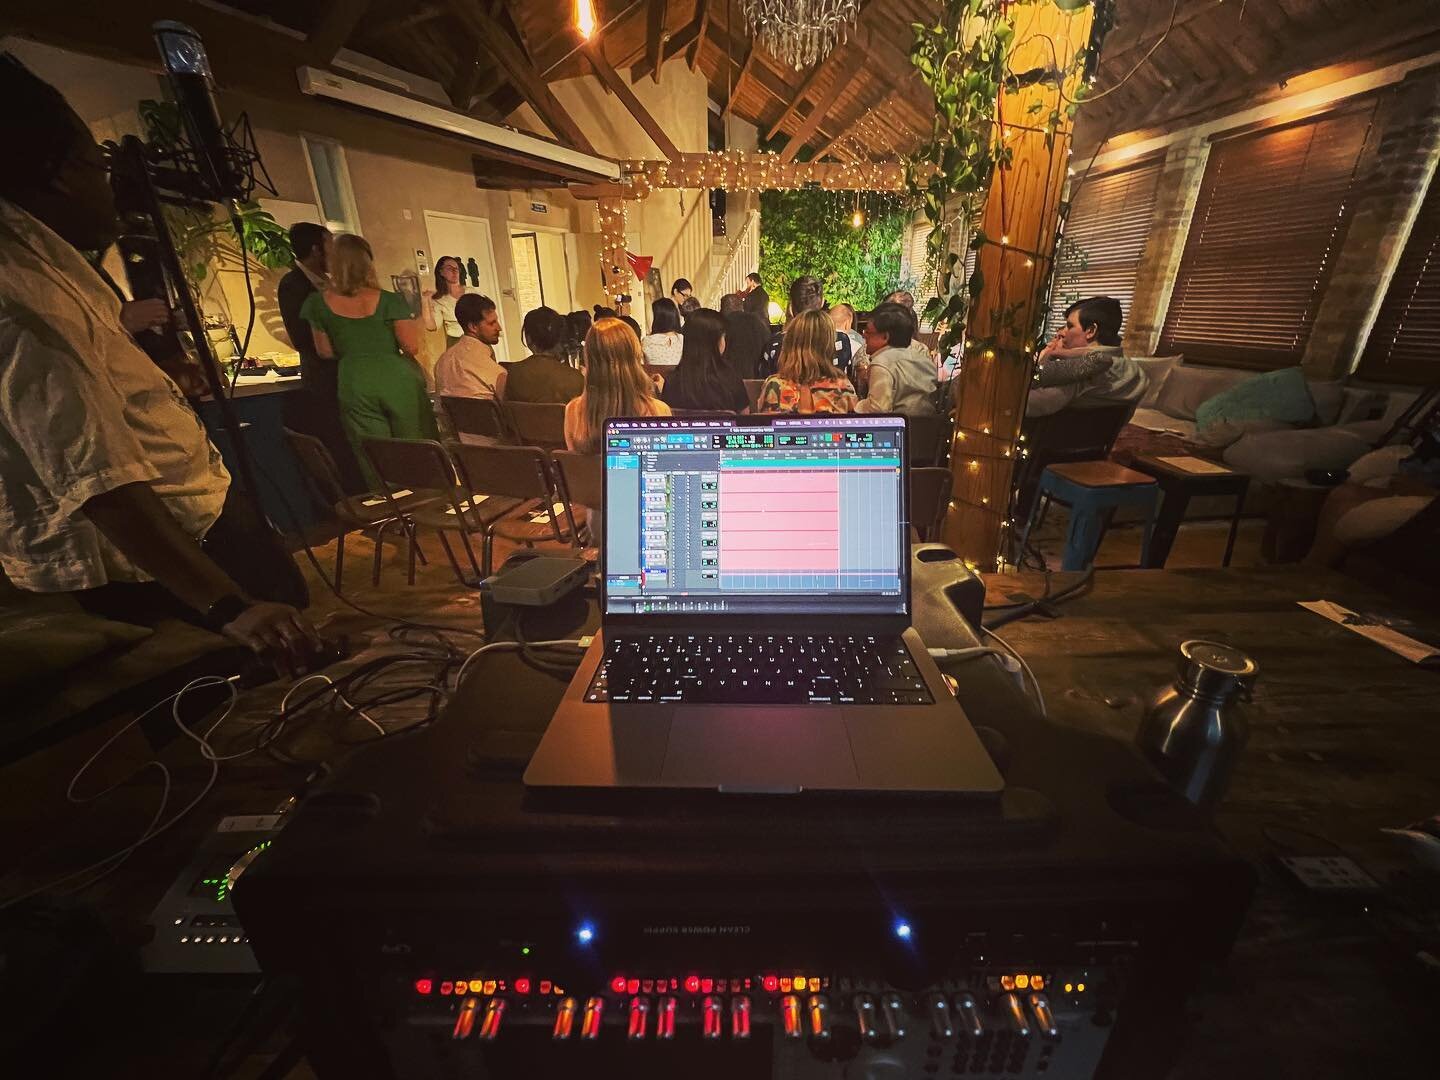 A rare live recording gig last night, recording sound for a concert recording of a new musical by the phenomenally talented @sampianistimproviser at the brilliant @shoreditchtreehouse 

I find it really inspiring and interesting to work on the other 